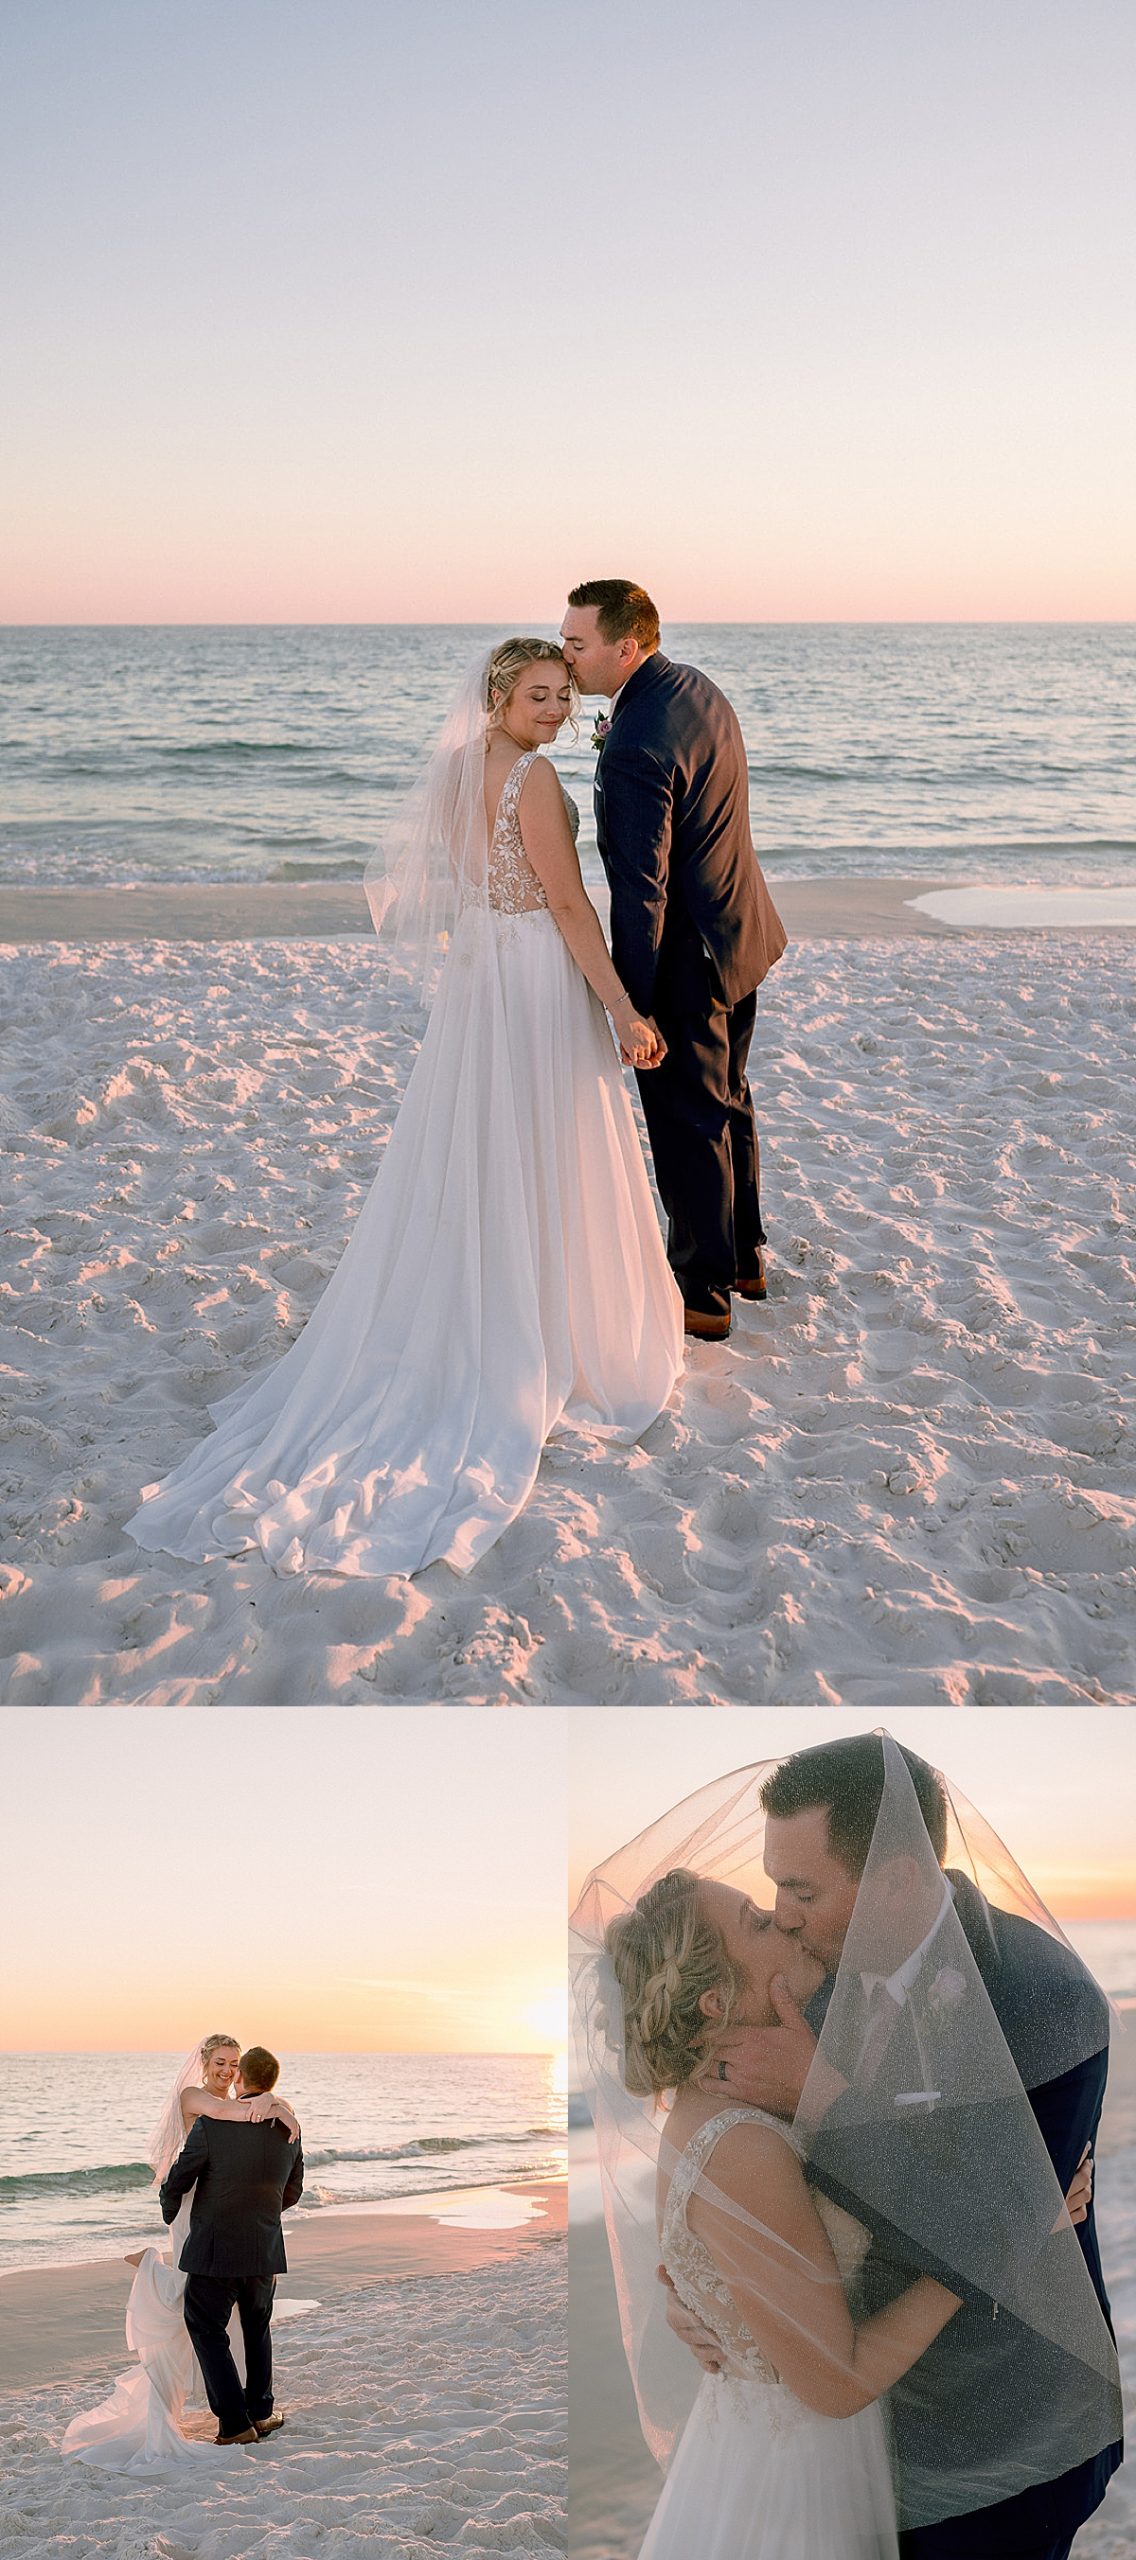 newly married couple twirl one another on beach at sunset by Emily burns photo